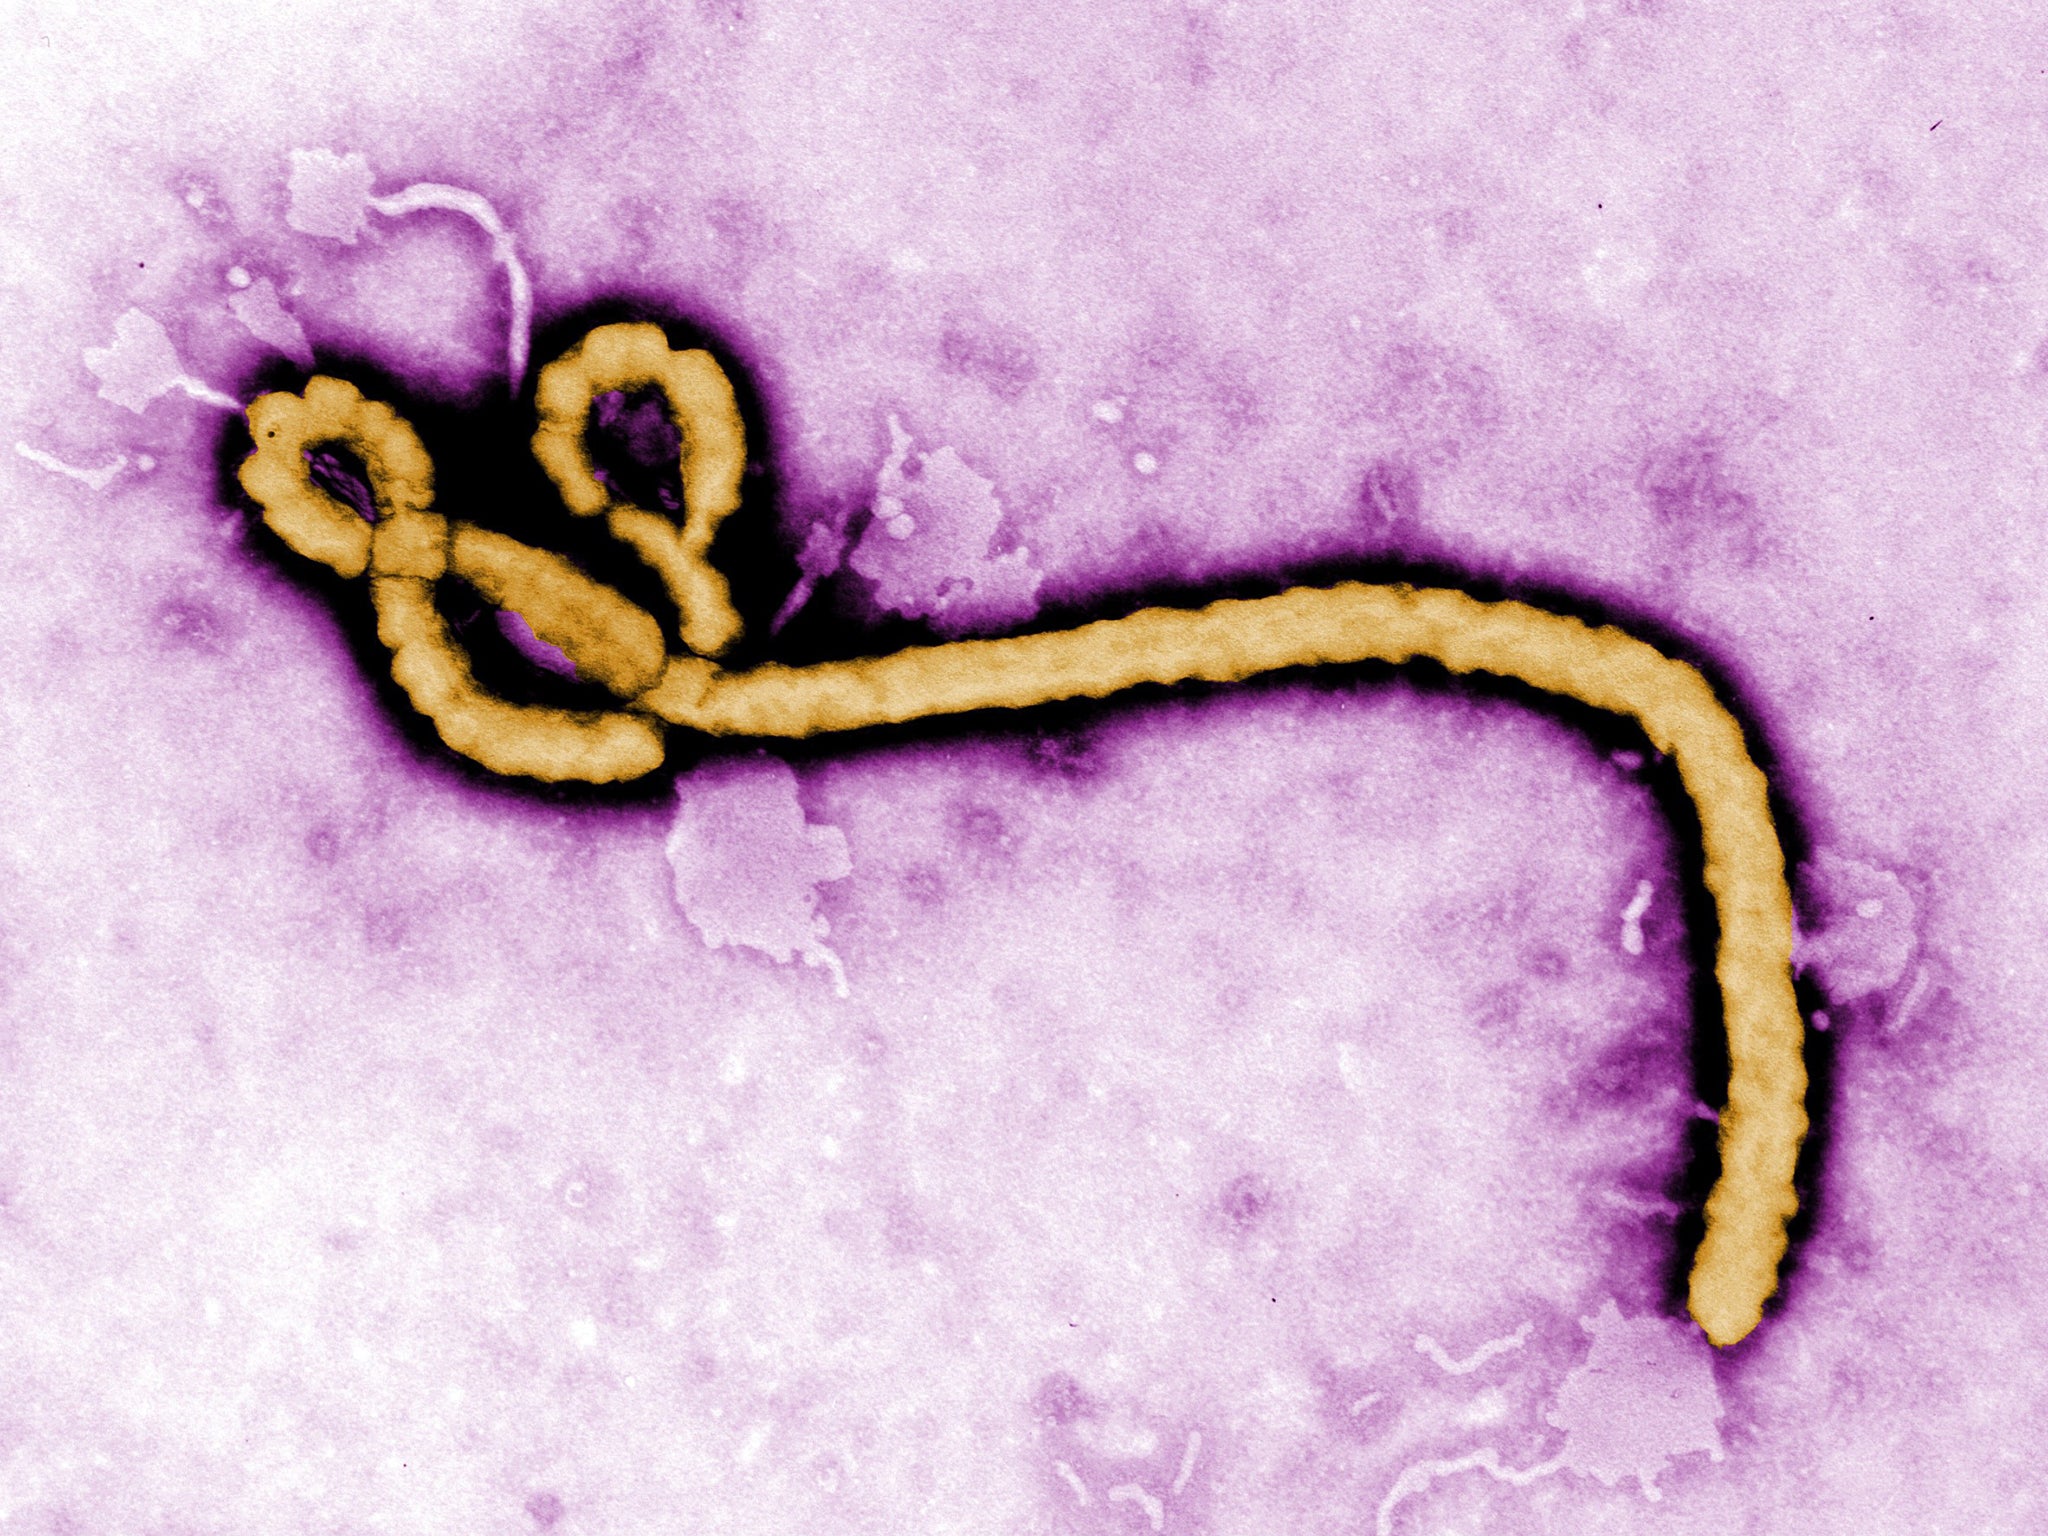 Experts warn people against relaxing their guard over the Ebola virus